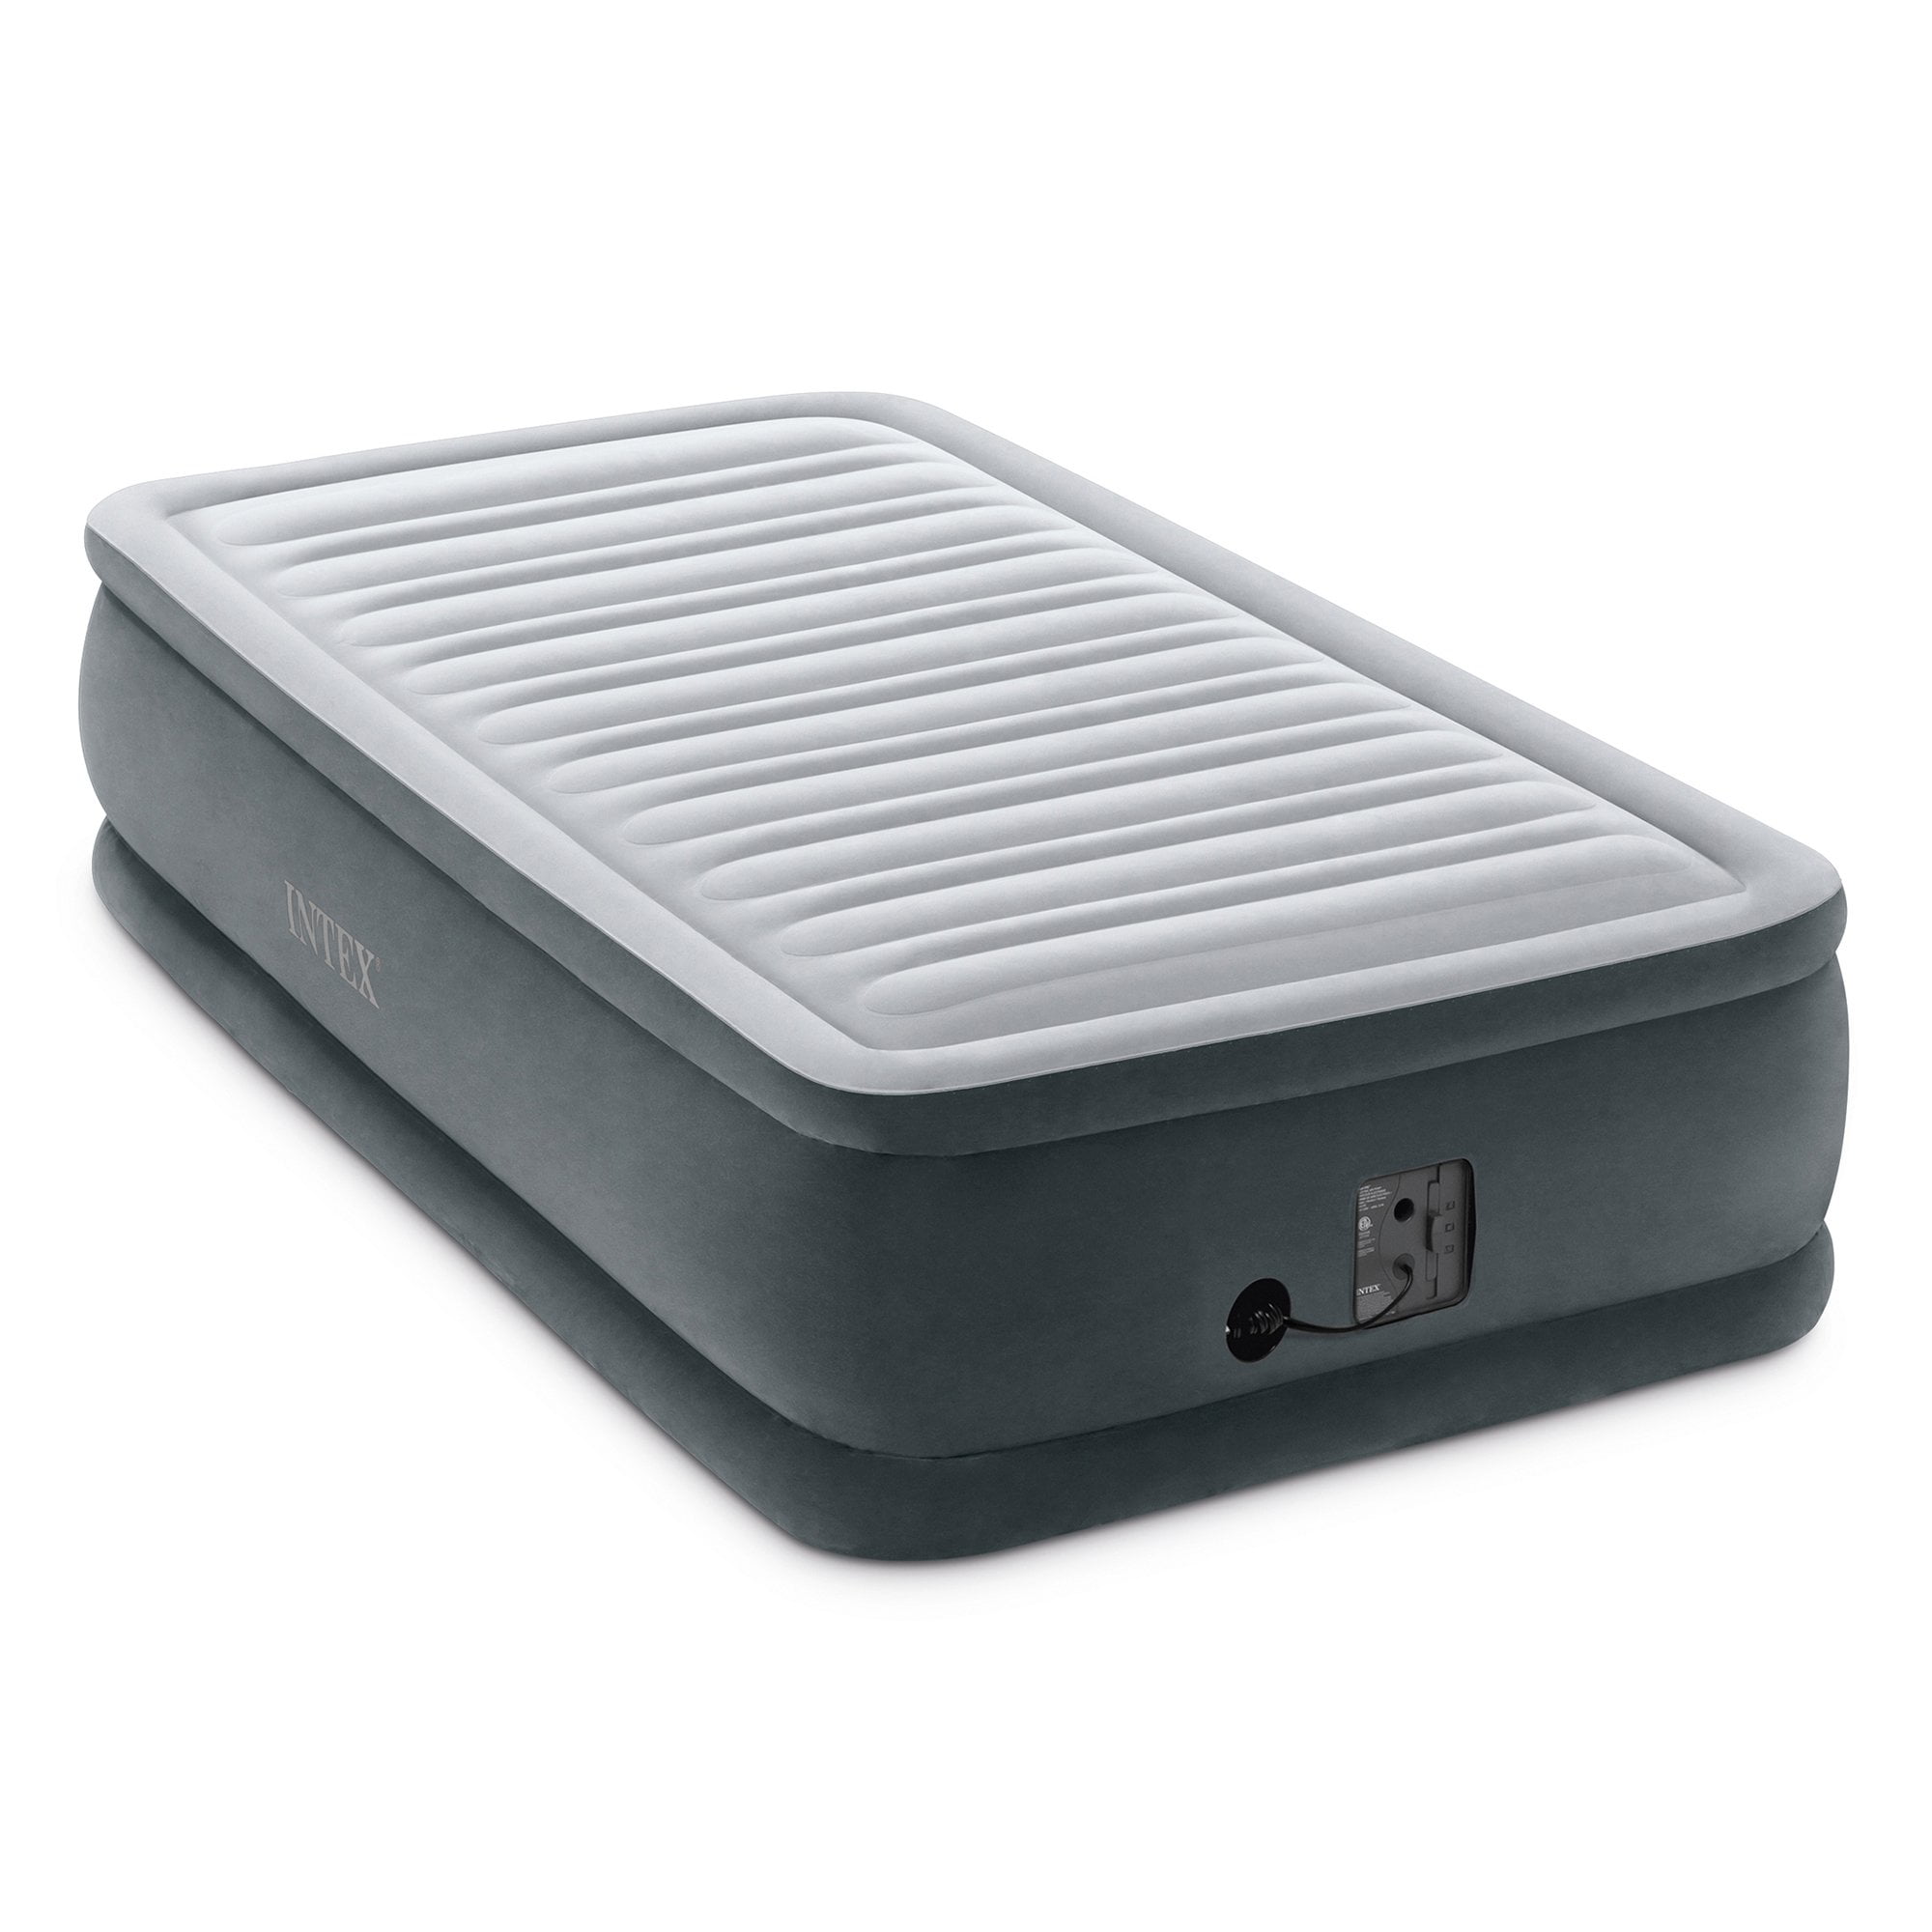 81inch Deluxe Inflatable Air Mattress Bed with Rechargeable Pump Raised Airbed 